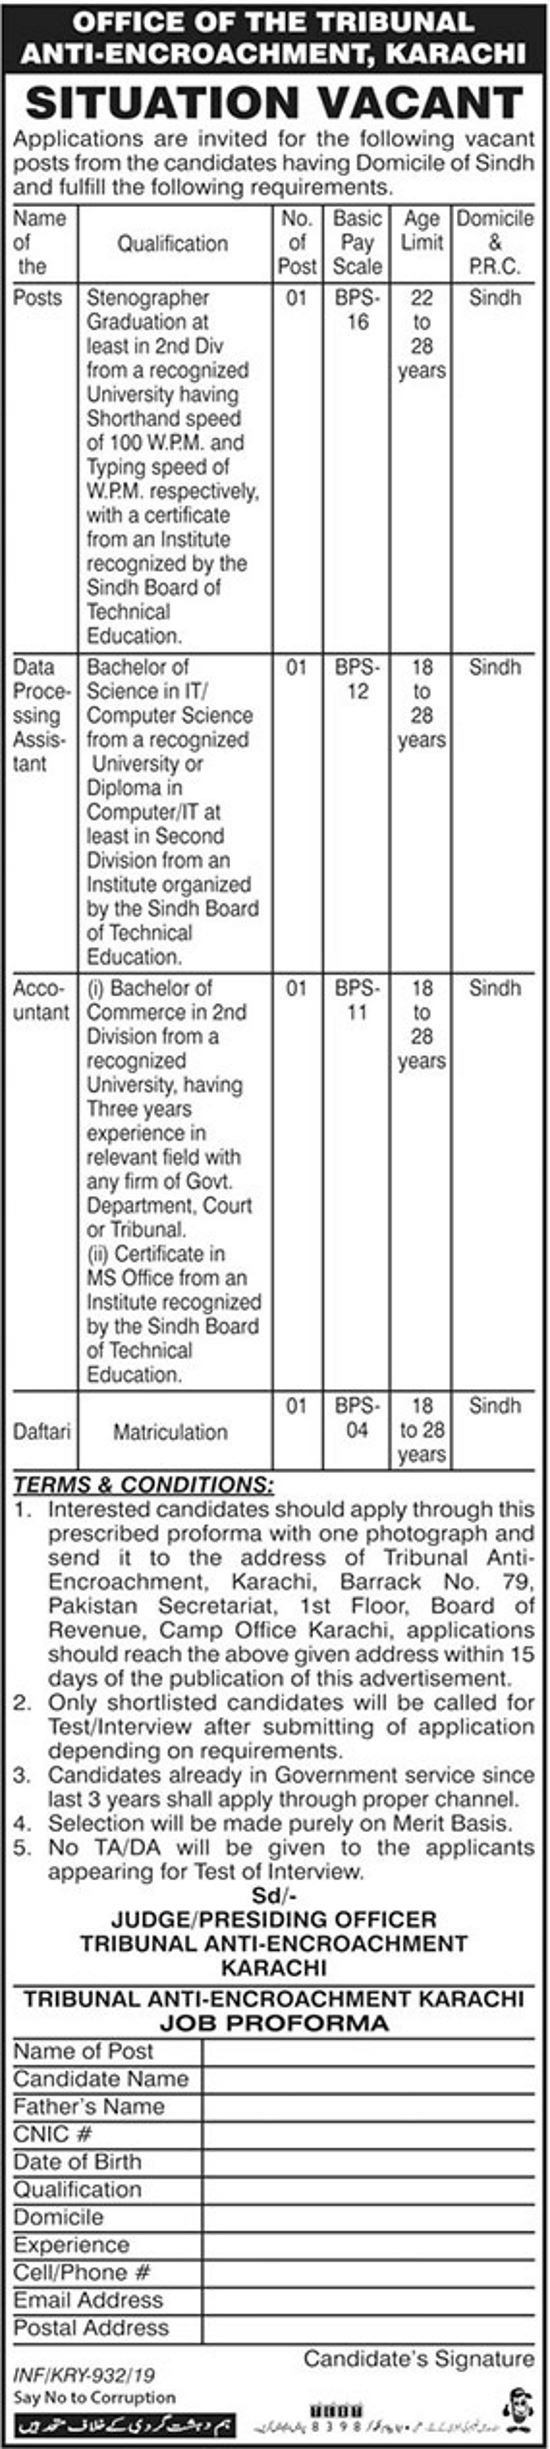 Anti-Encroachment Tribunal Karachi Jobs 2019 for Stenographer, Data Processing Assistant / IT, Accountant & Support Staff